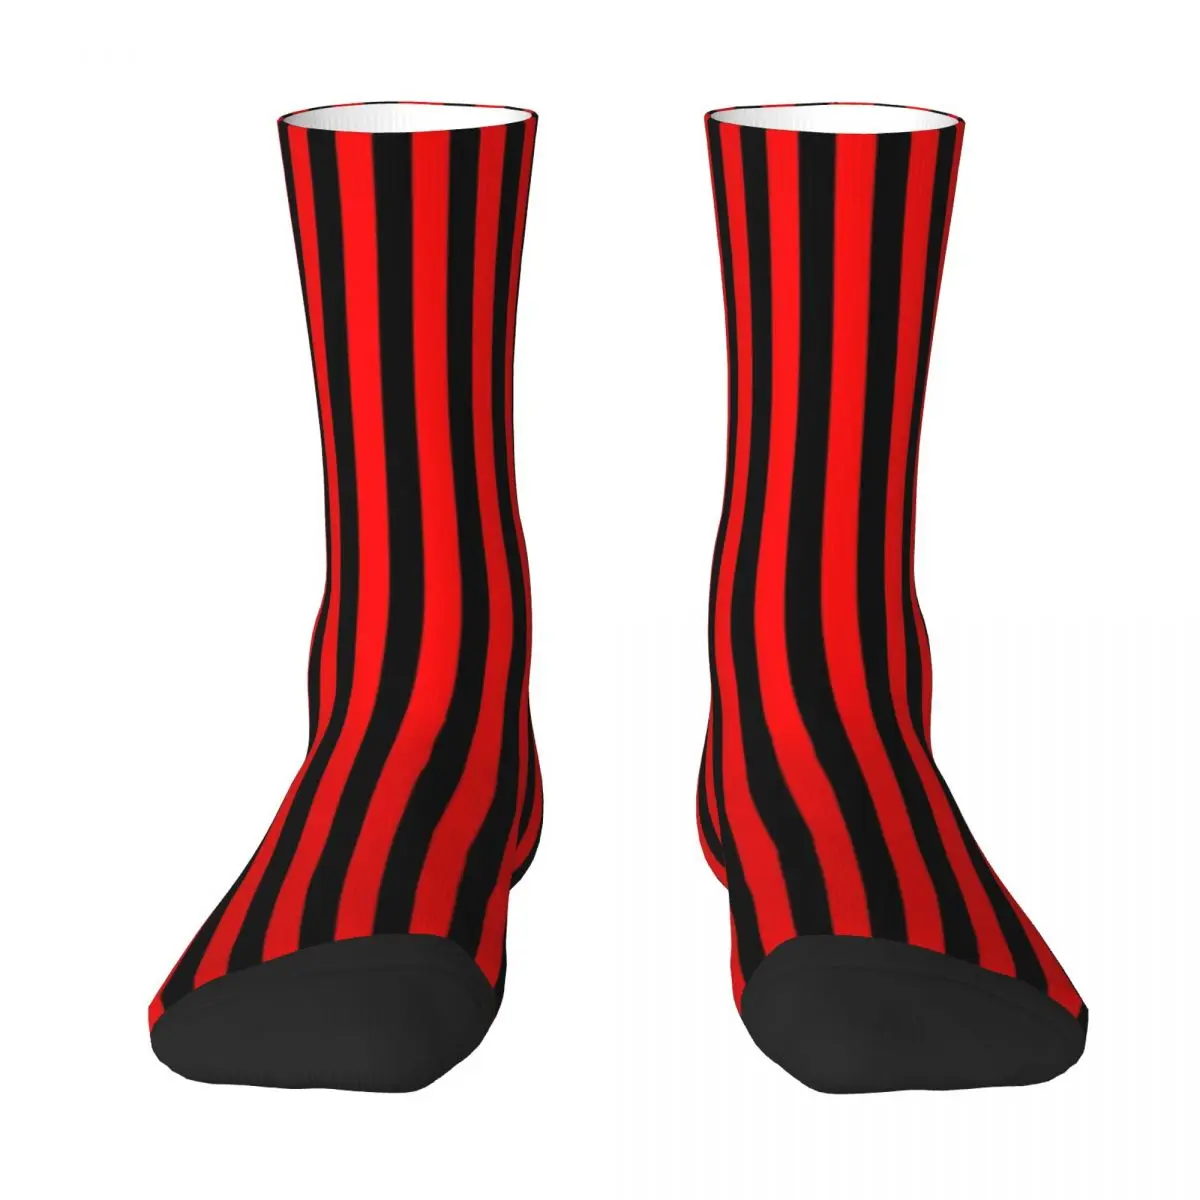 

Red And Black Vertical Stripes Socks Harajuku High Quality Stockings All Season Long Socks Accessories for Man's Woman's Gifts